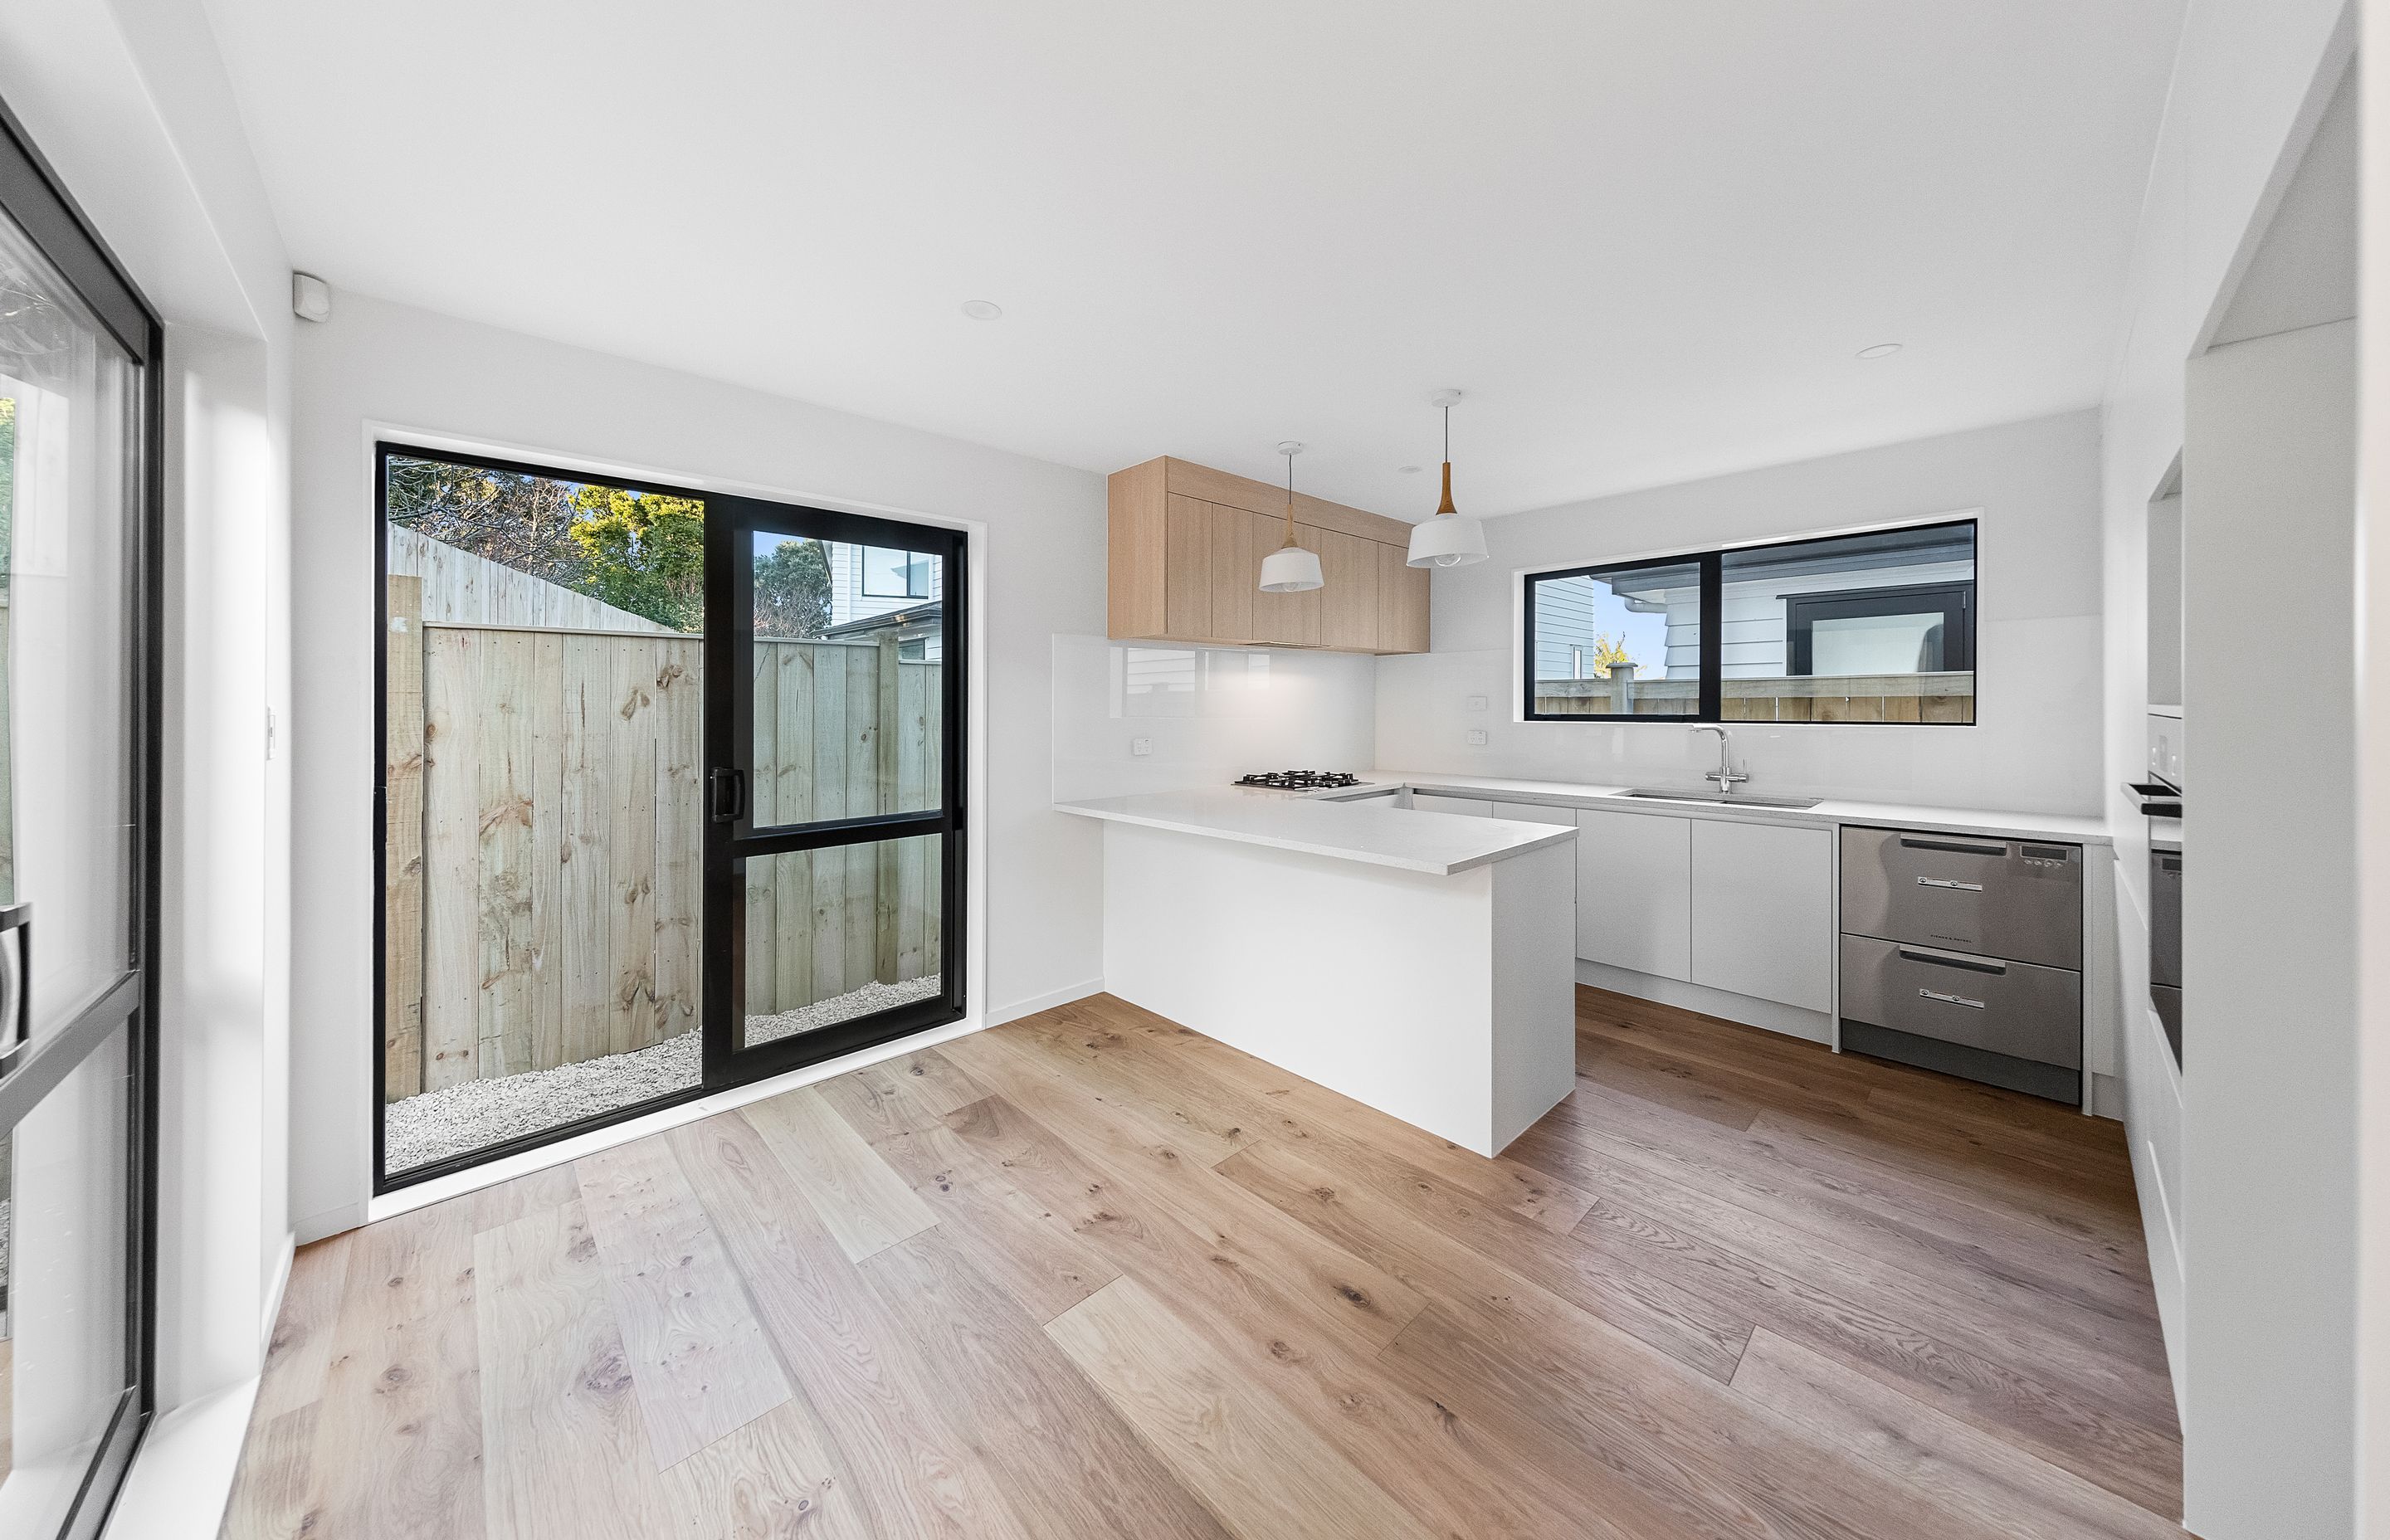 New Homes in Panmure, Auckland